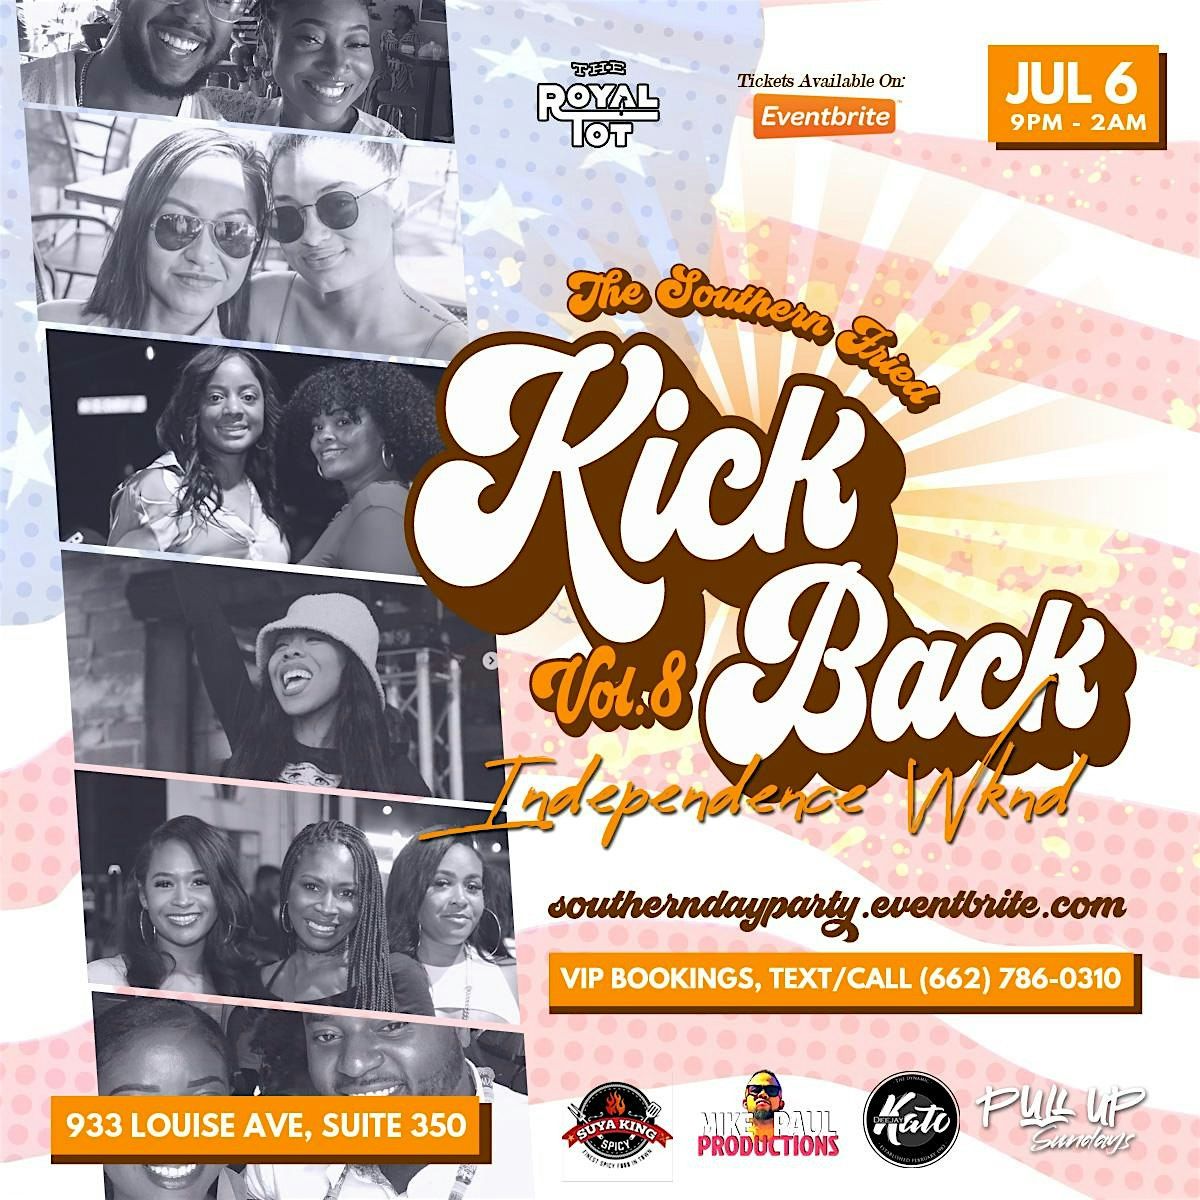 The Southern Fried Kickback Day-Party, Vol.8: Independence Weekend